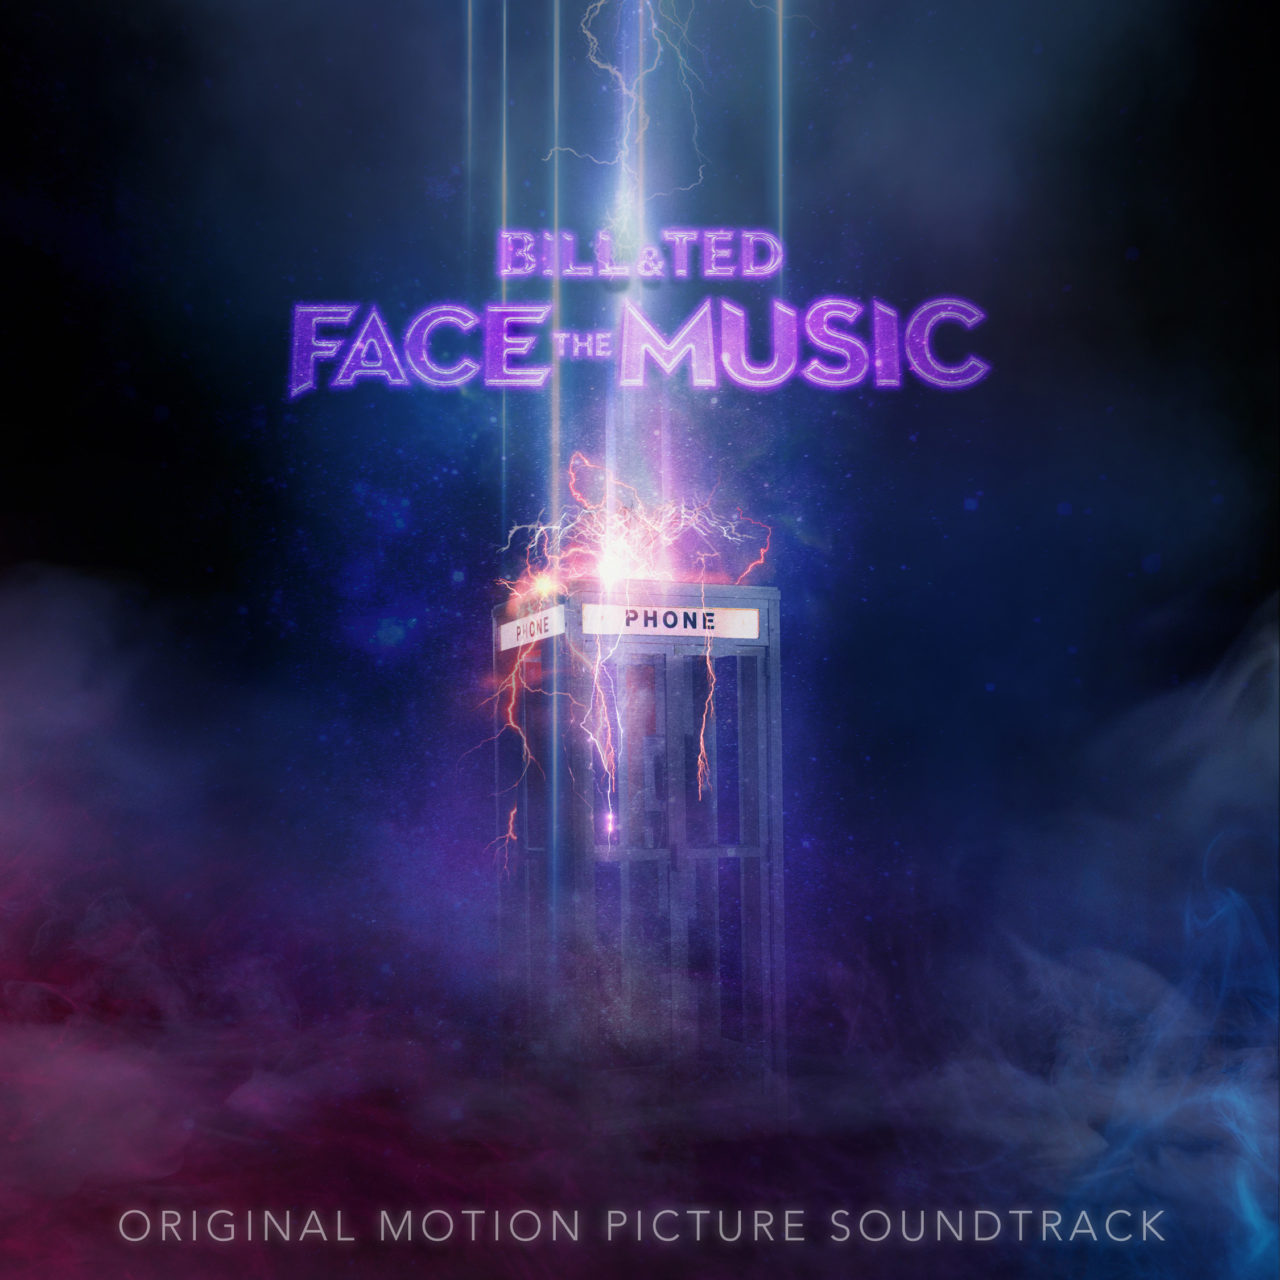 Bill & Ted Face The Music Soundtrack cover (10kProjects/Orion Pictures)